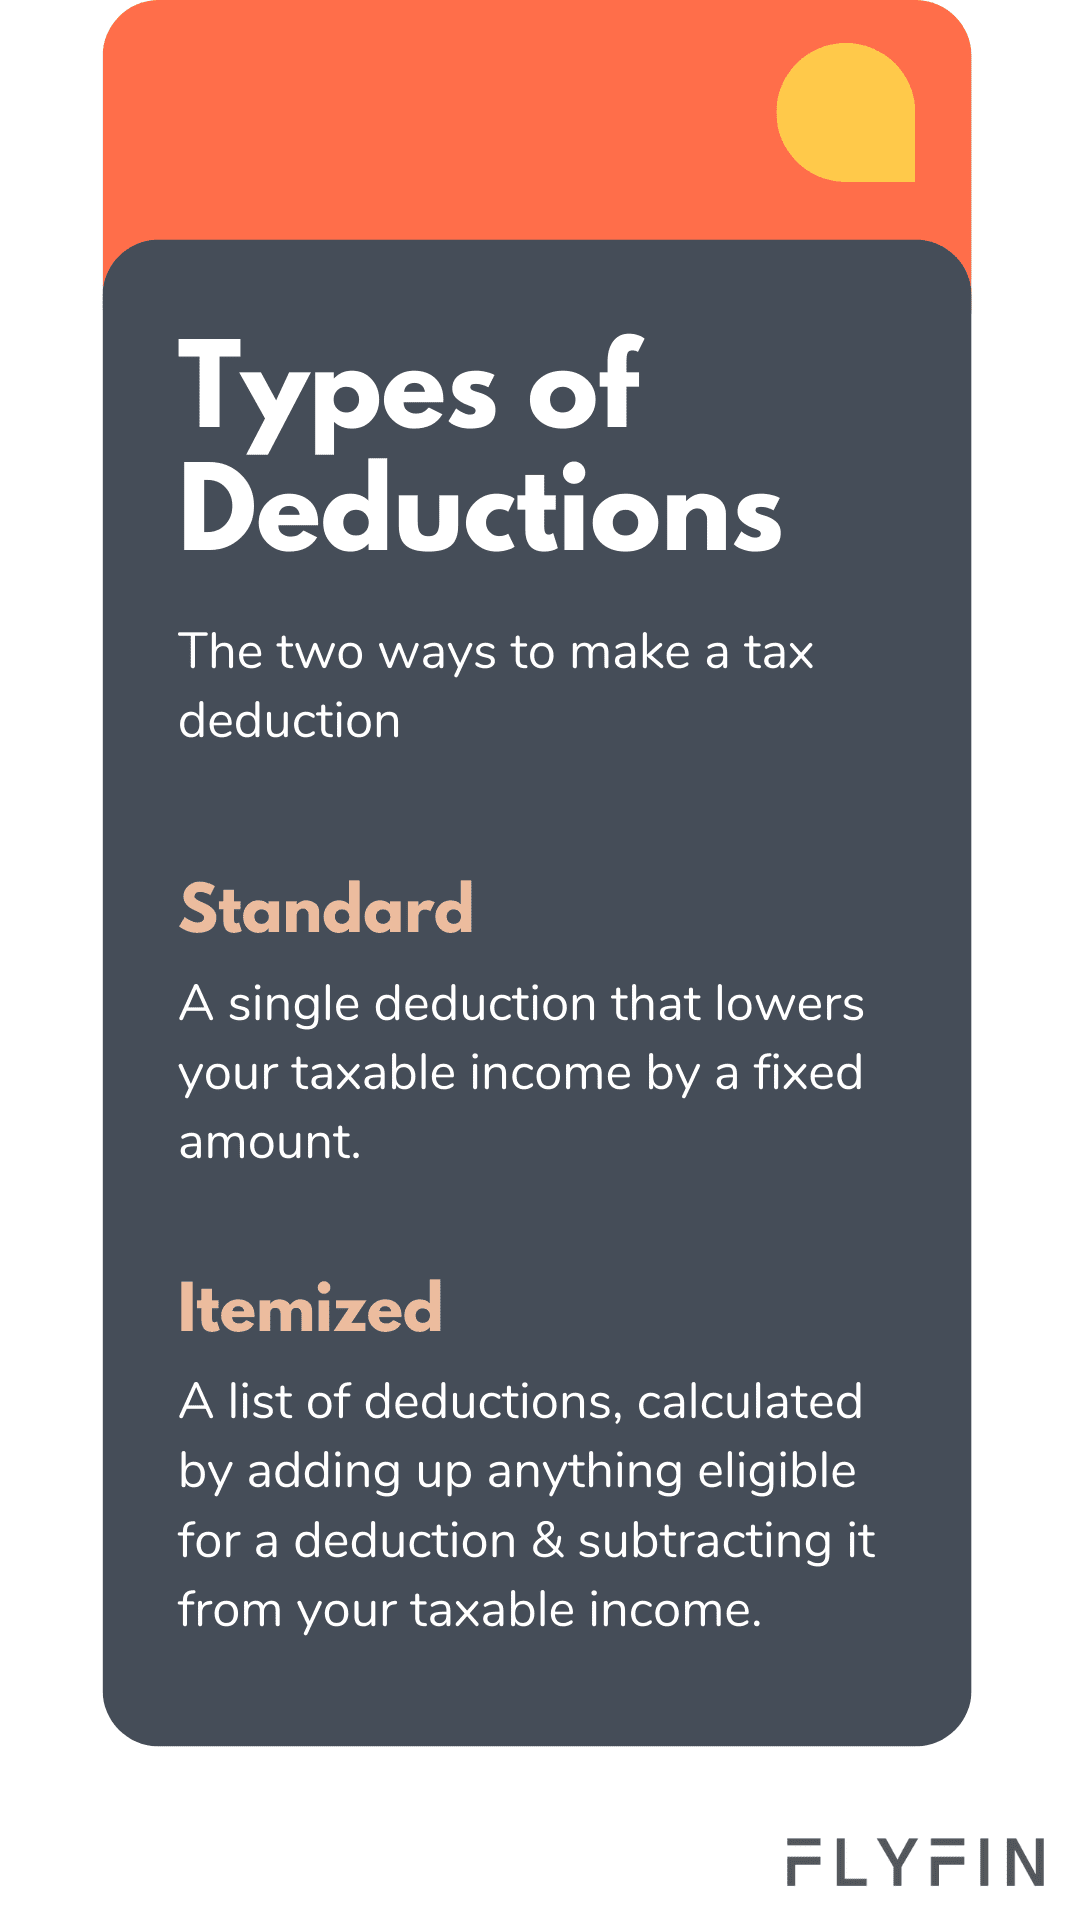 Image describing types of tax deductions - Standard (fixed amount) & Itemized (list of eligible deductions subtracted from taxable income). Relevant for self-employed, 1099, freelancer, taxes.